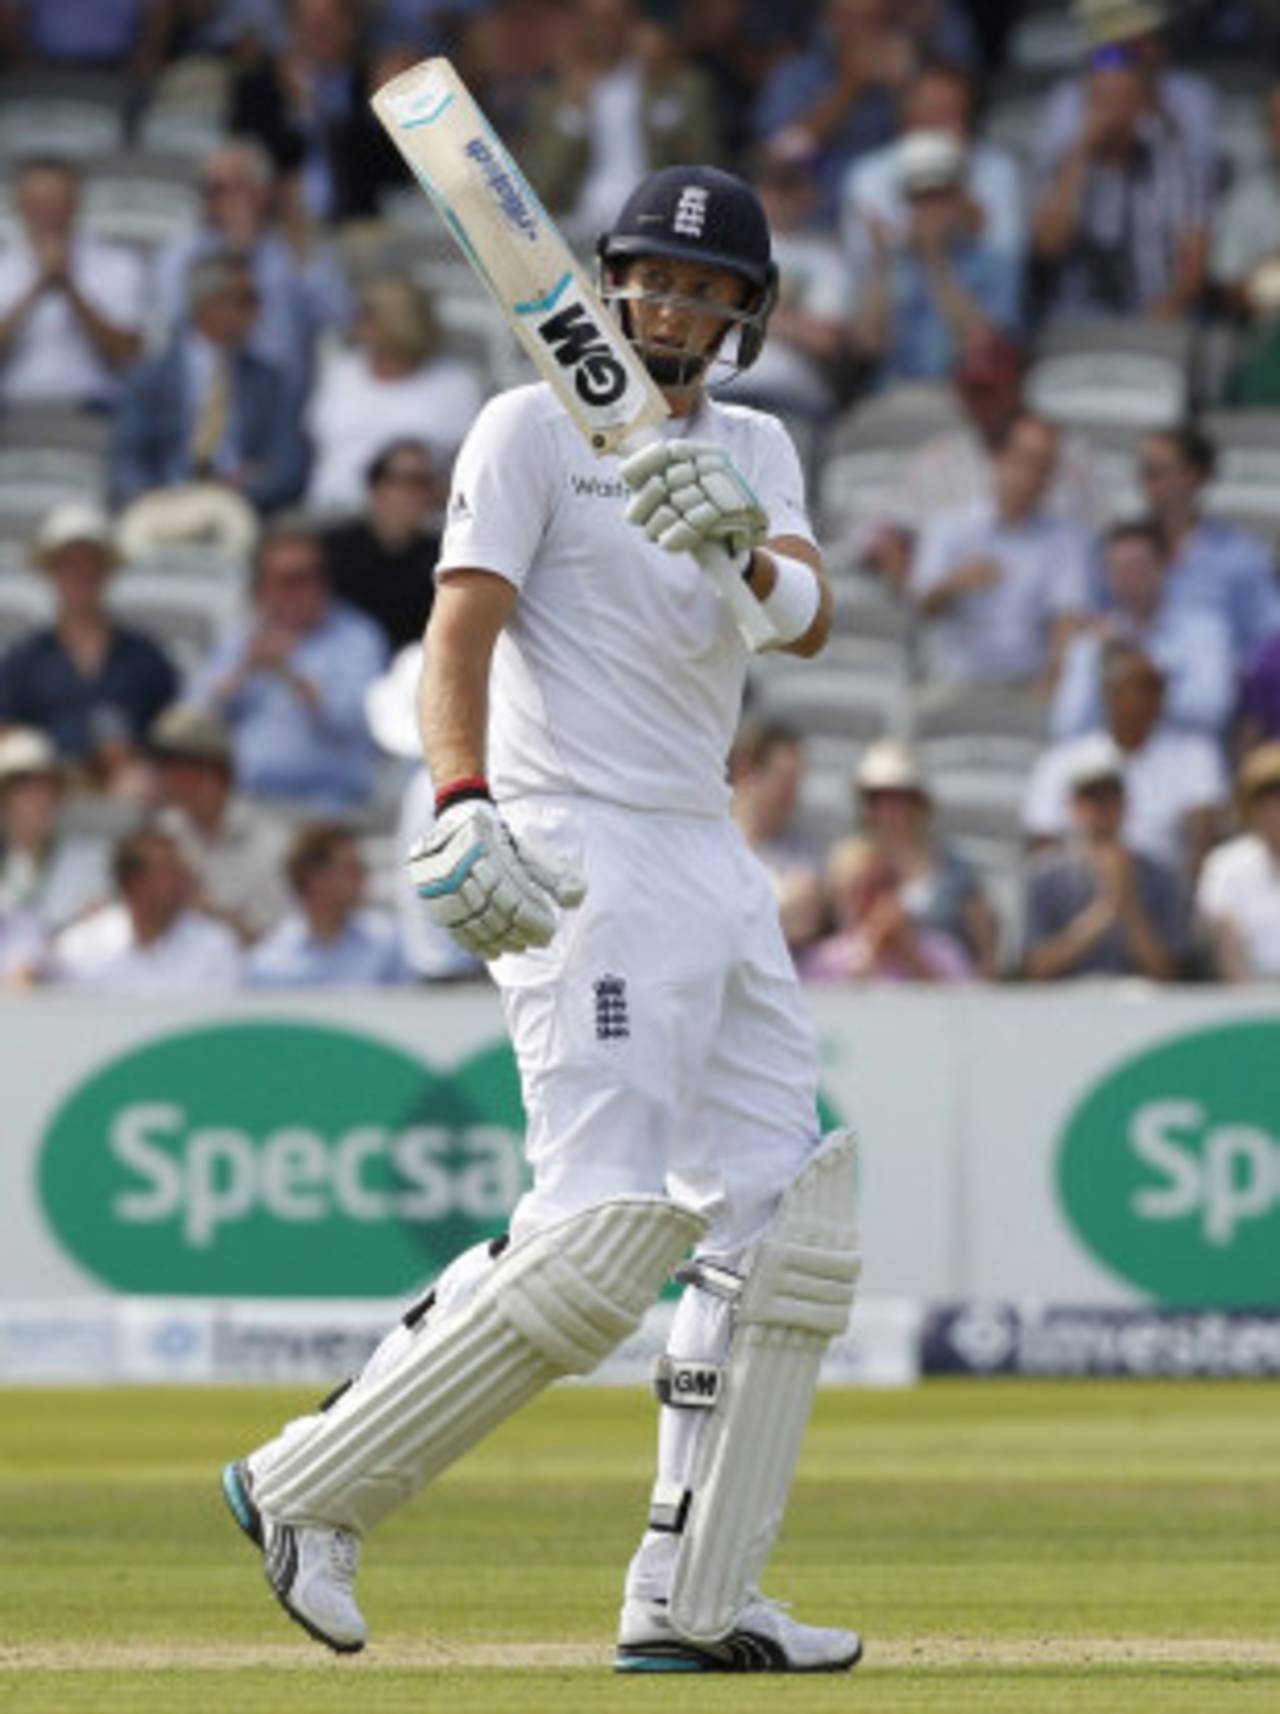 Joe Root raises his bat after reaching fifty, England v Sri Lanka, 1st Investec Test, Lord's, 1st day, June 12, 2014